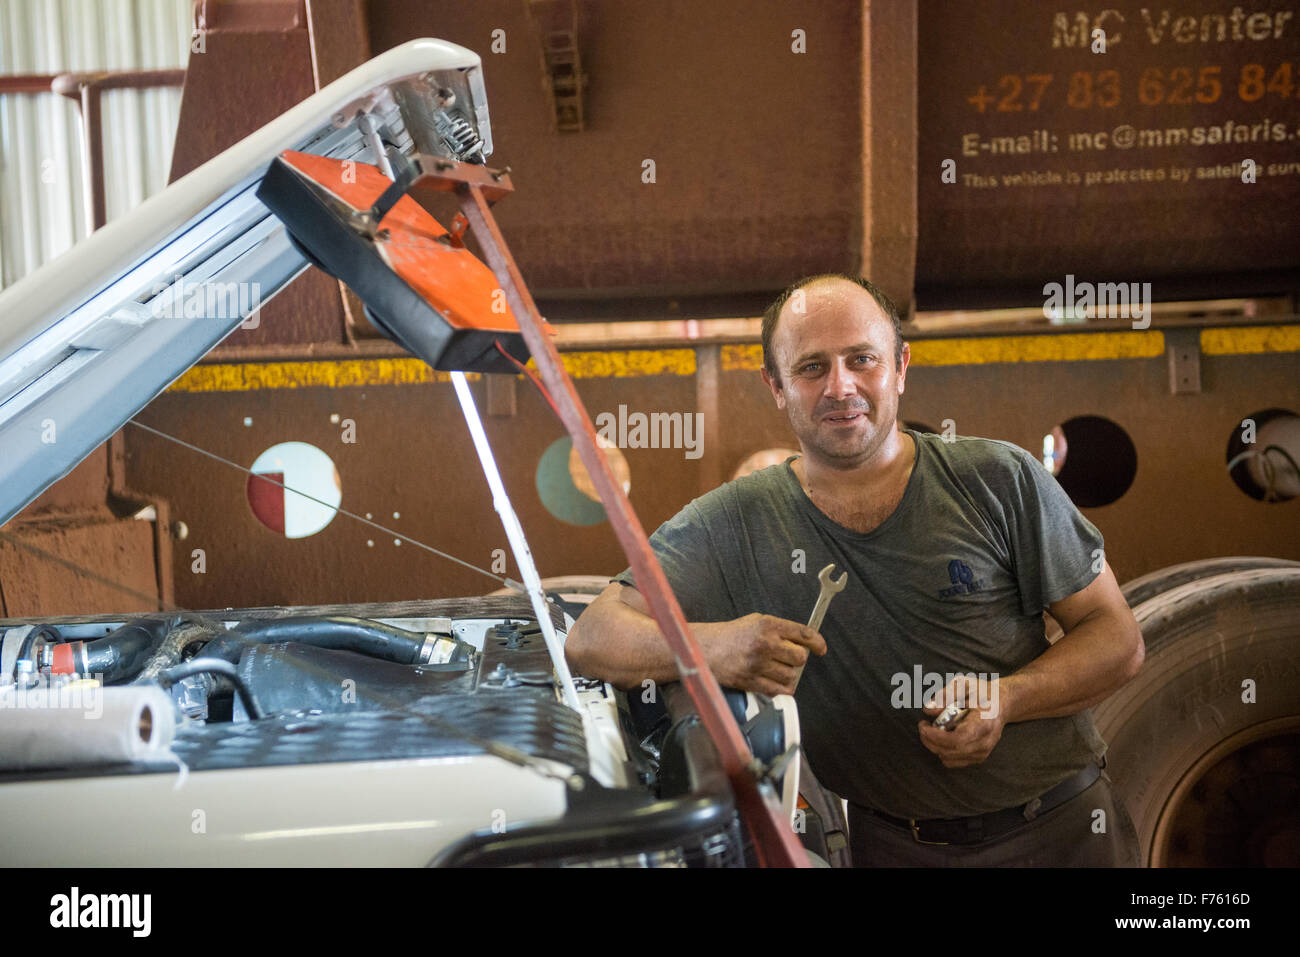 Lephalale , South Africa - Mechanic in truck repair shop Stock Photo